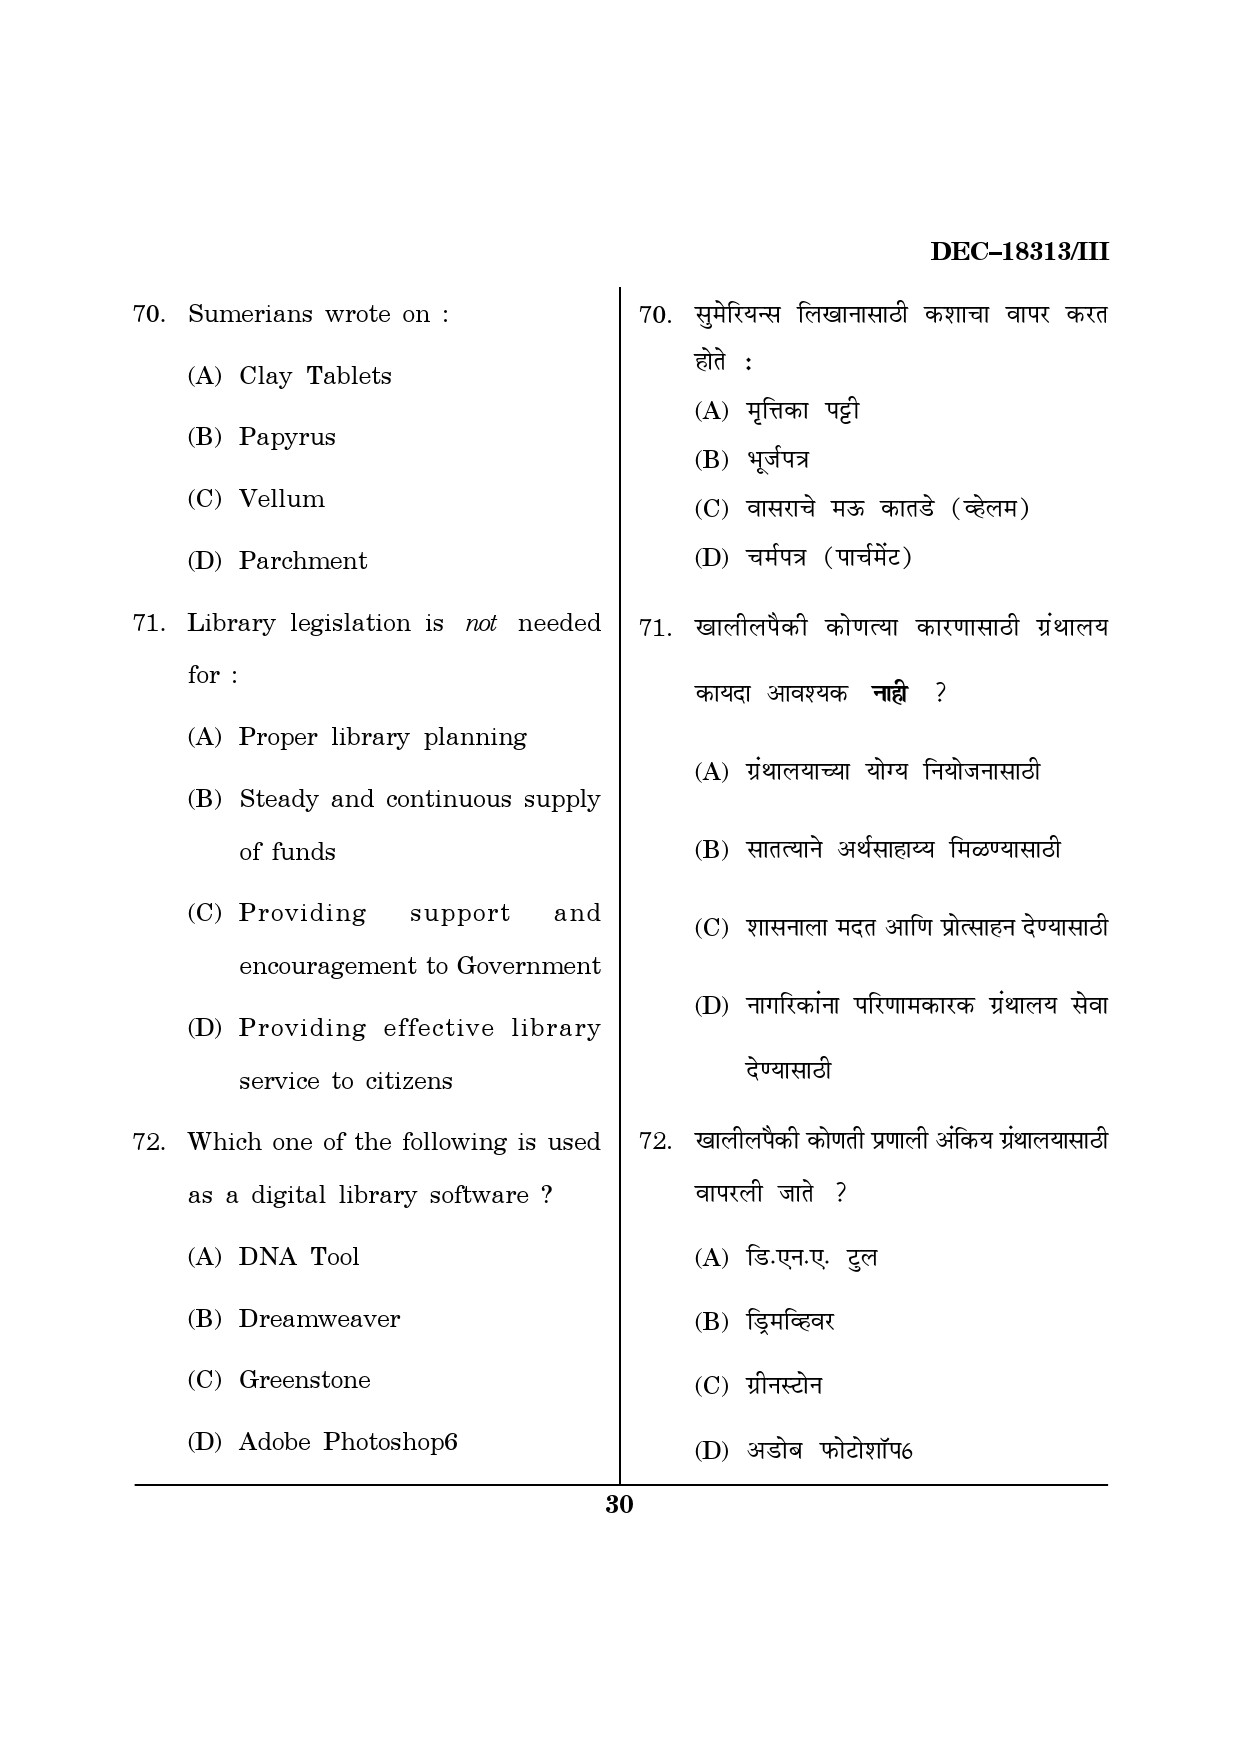 Maharashtra SET Library Information Science Question Paper III December 2013 29